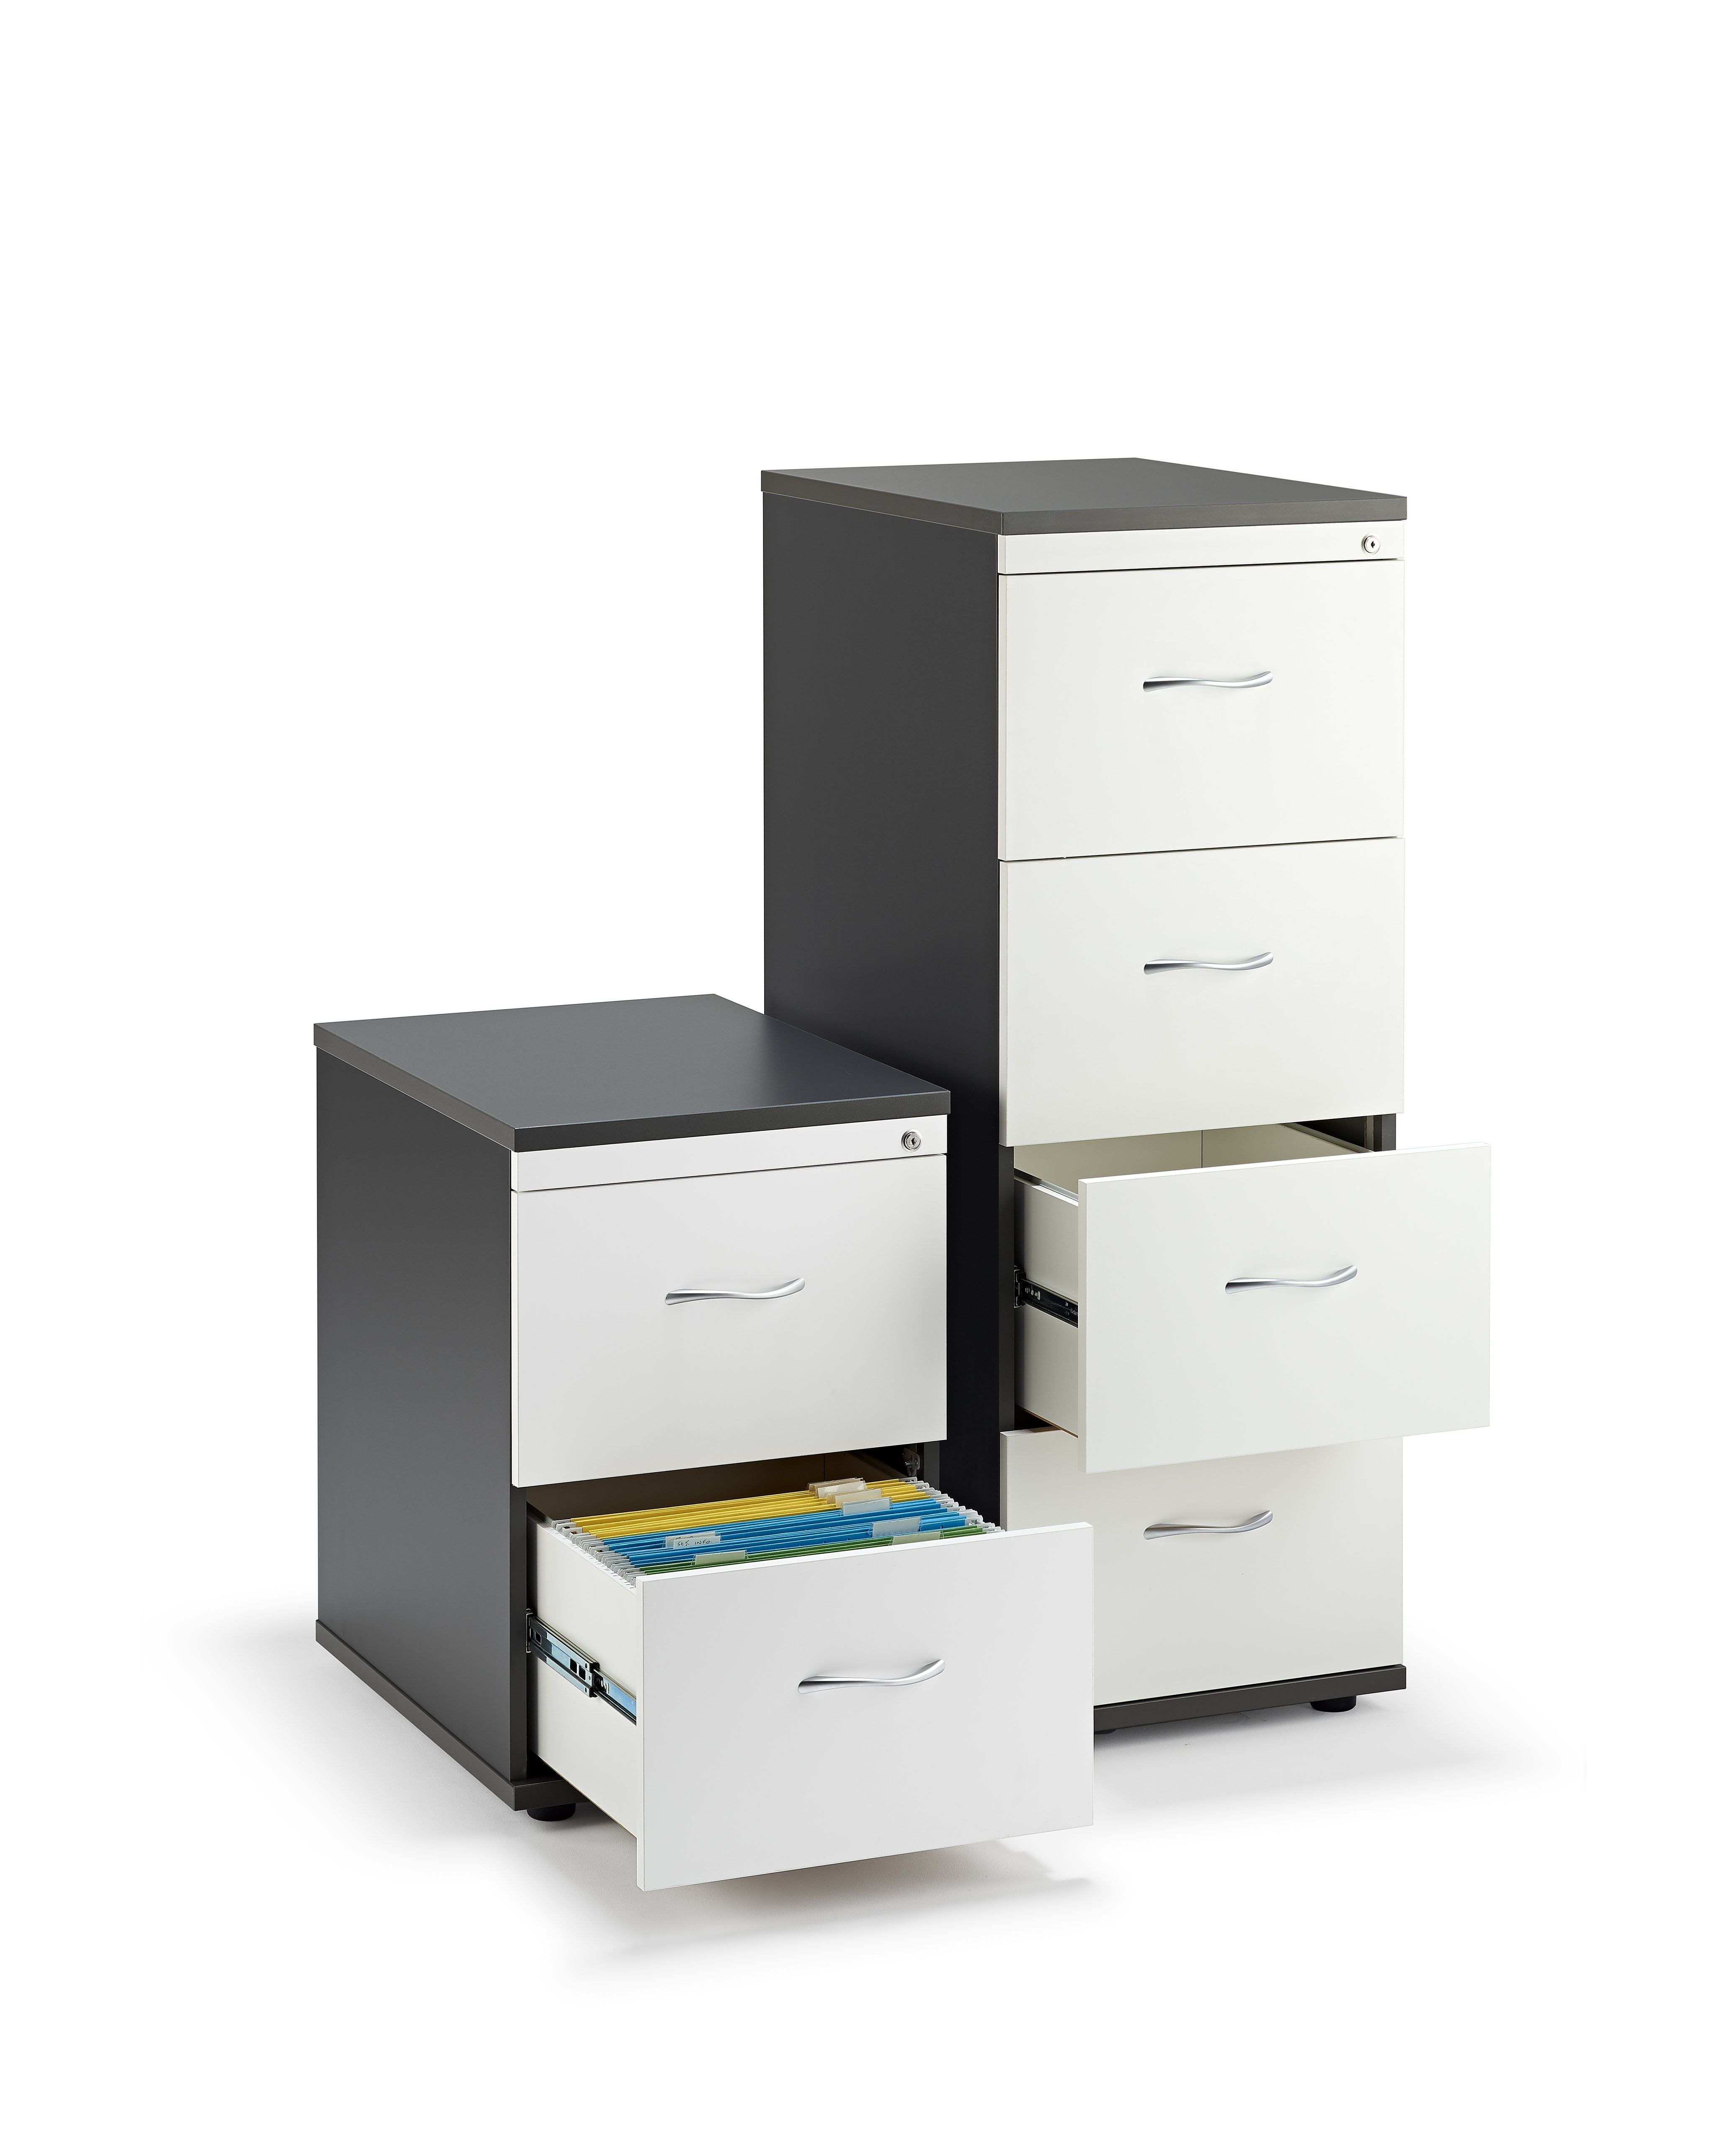 Graphite Grey And White Office Filing Cabinet With Silver Handles intended for proportions 4134 X 5149